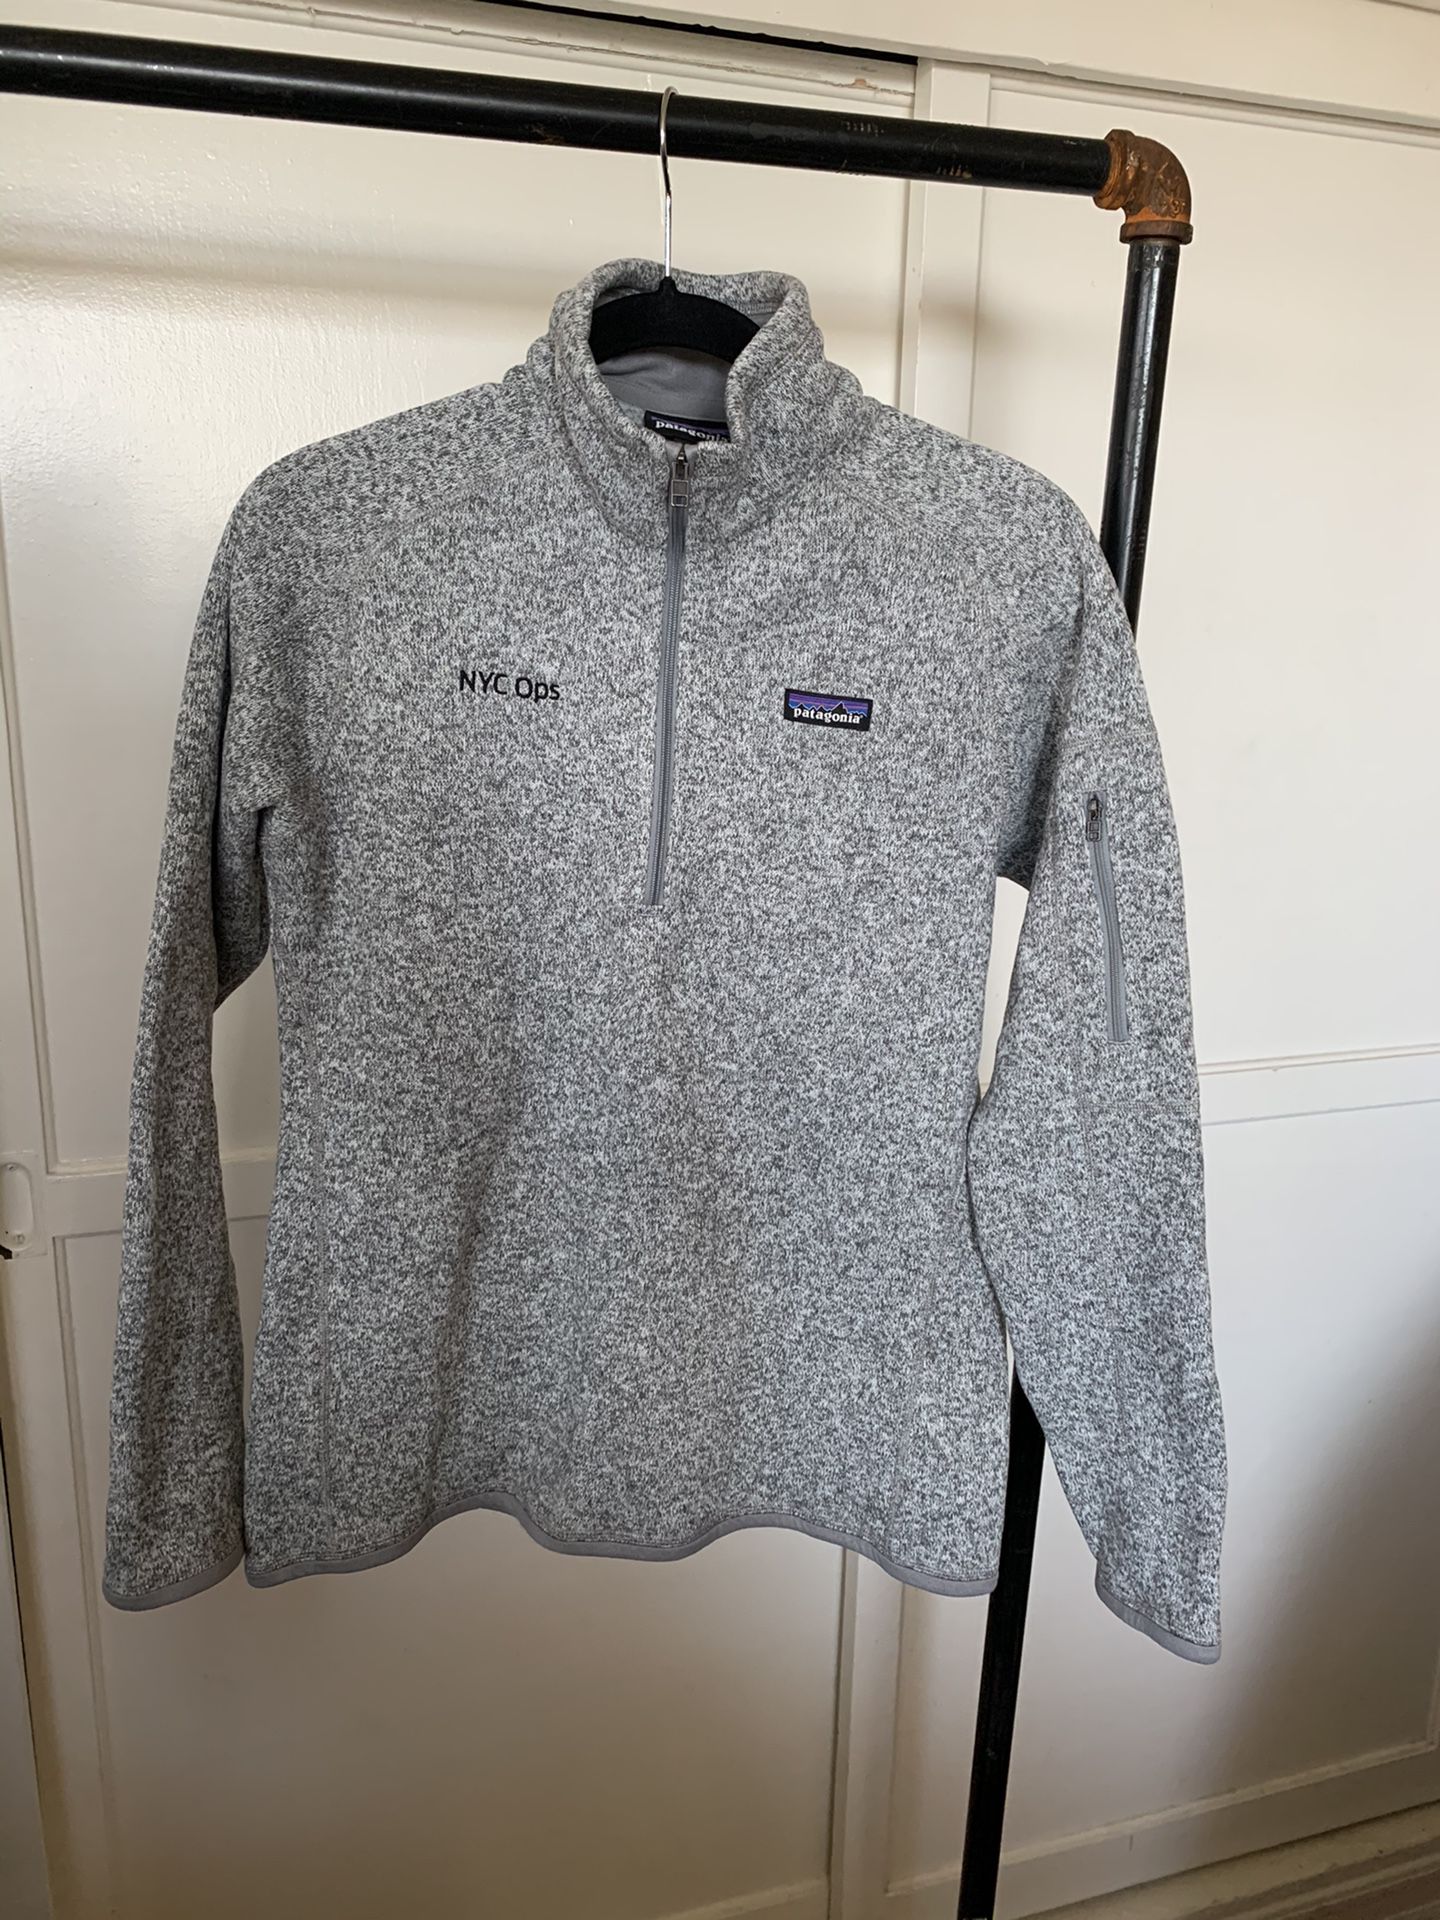 Patagonia better sweater 3/4 zip pullover